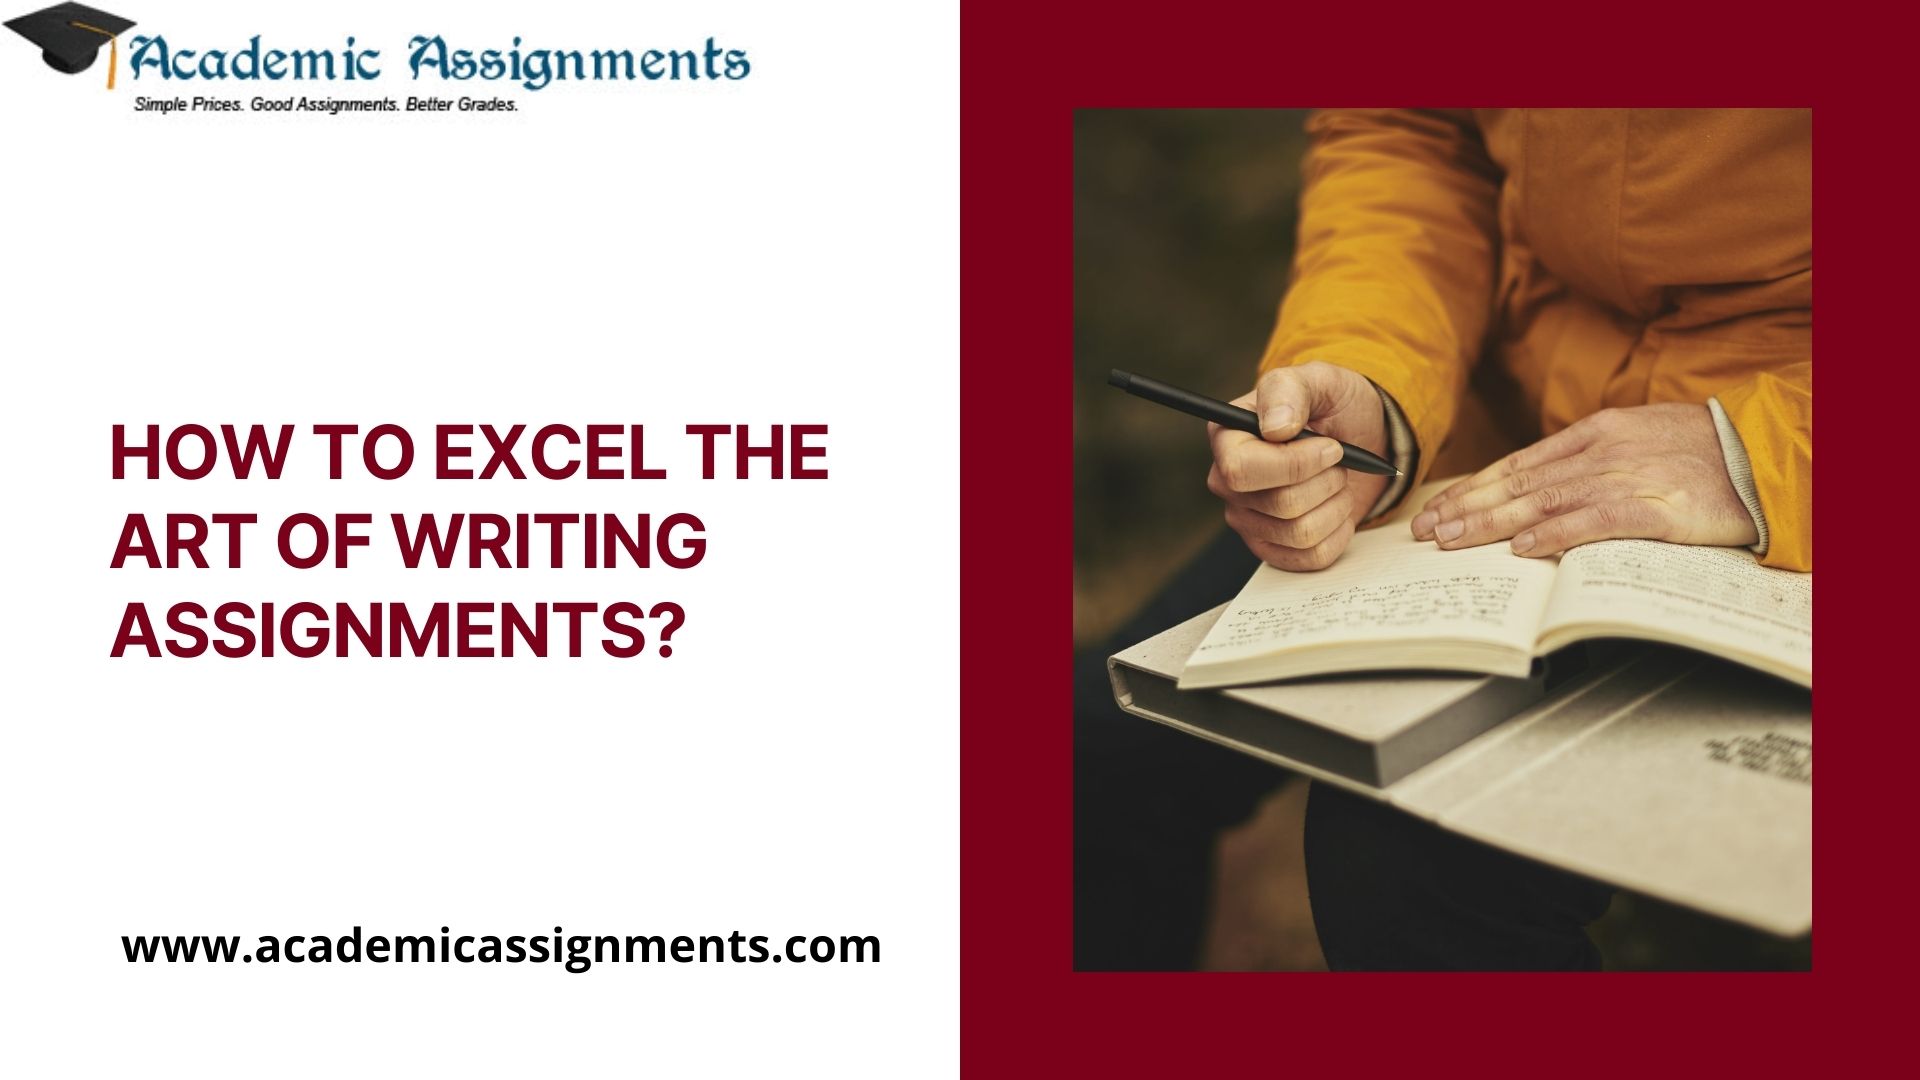 HOW TO EXCEL THE ART OF WRITING ASSIGNMENTS